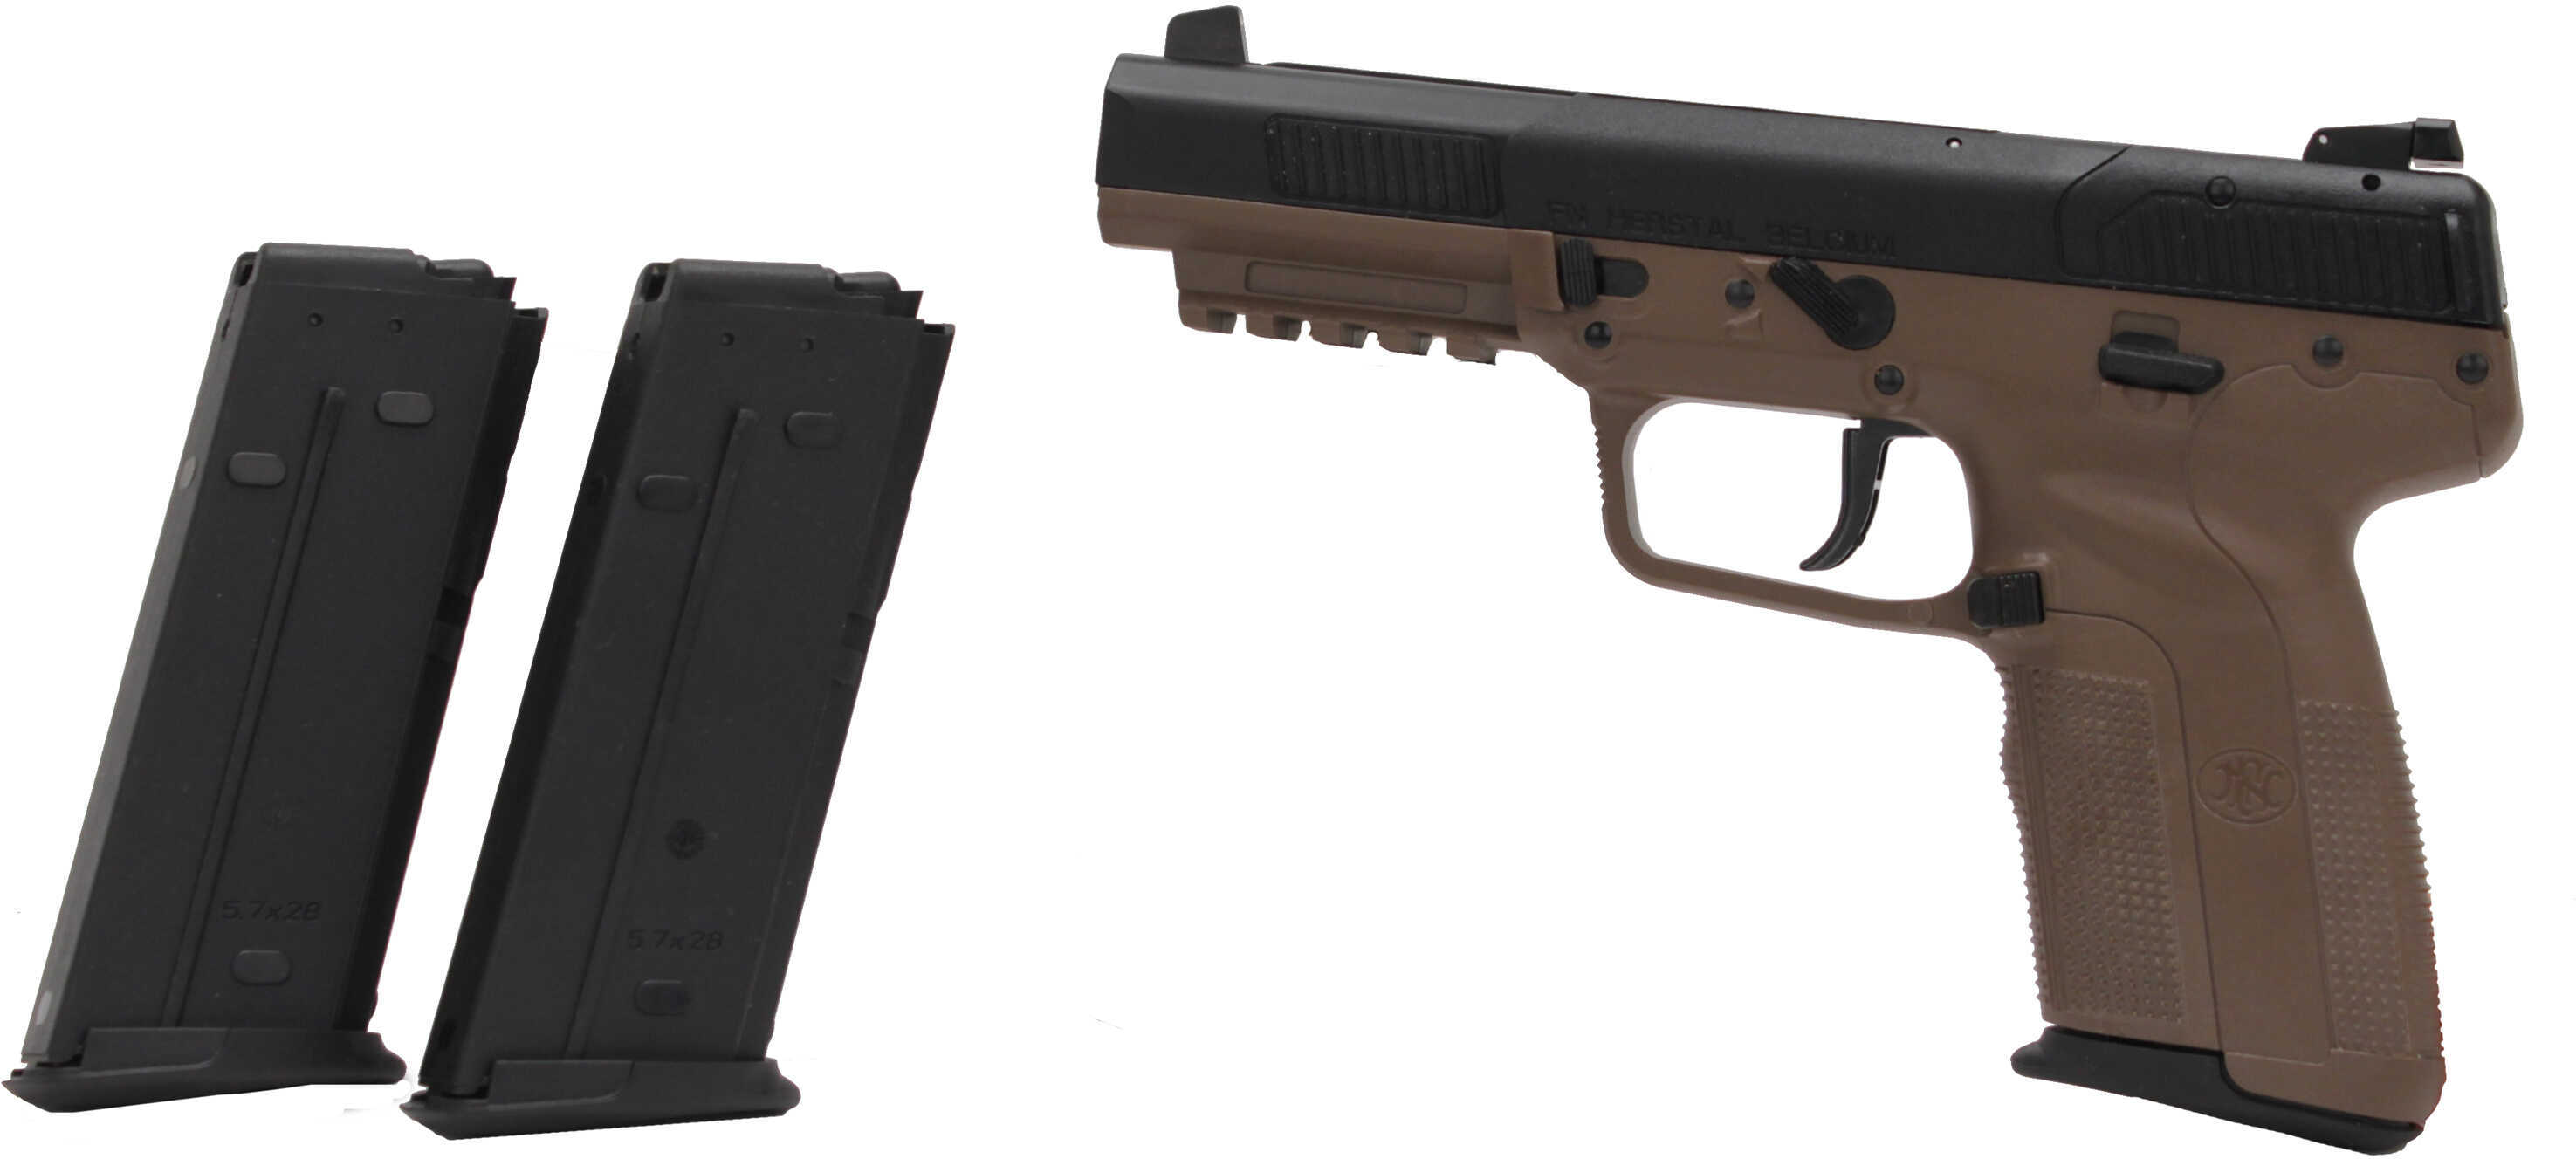 FNH USA Five-Seven Pistol 5.7x28mm 3-20 Round Magazines Adjustable Sights Flat Dark Earth Finish Semi Automatic Check Your Local Laws 3868929350